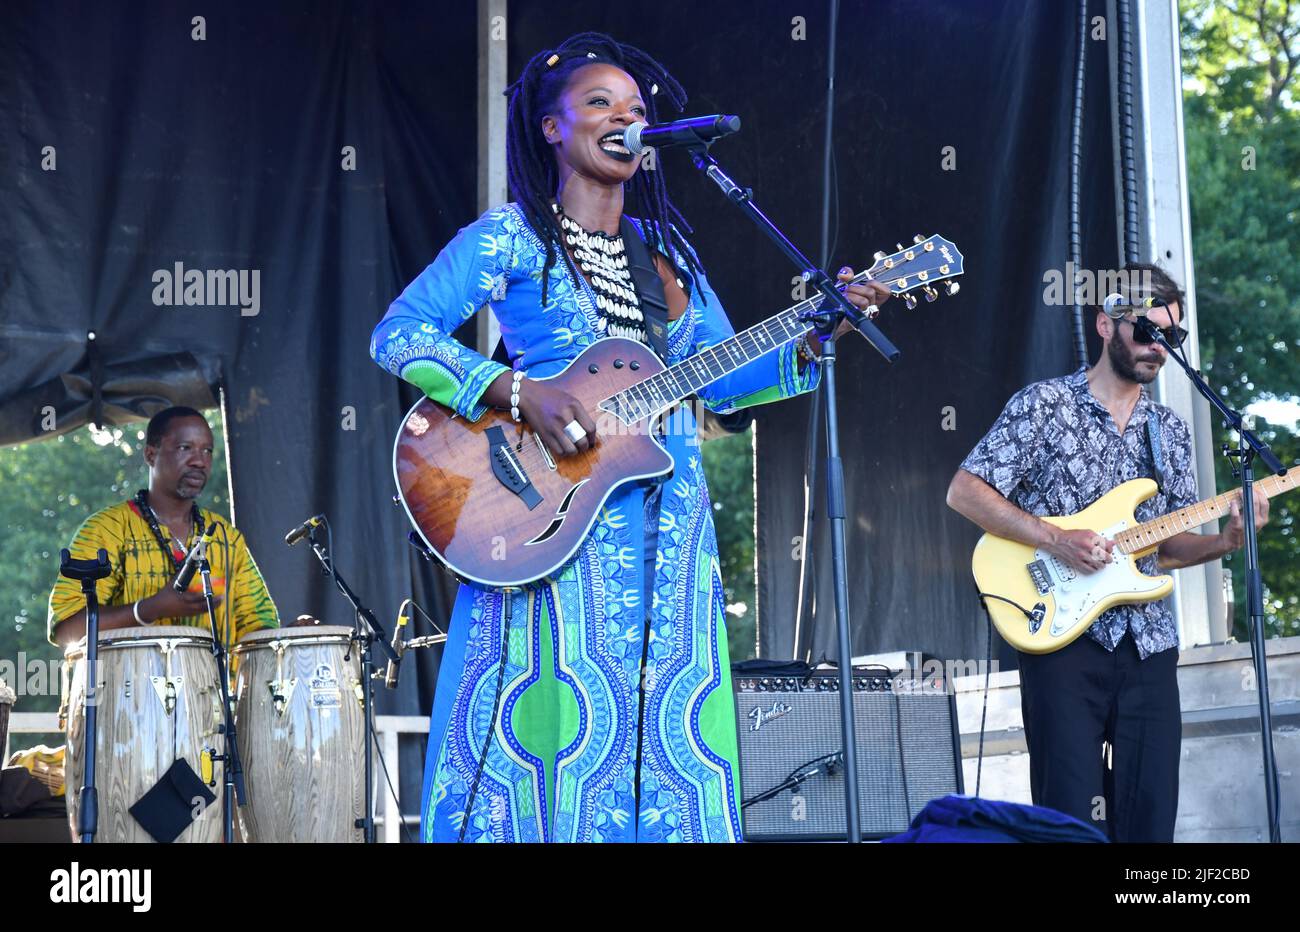 Singer, songwriter and musician Natu Camara is shown performing on stage during a “live” concert appearance at the Green River Festival. Stock Photo